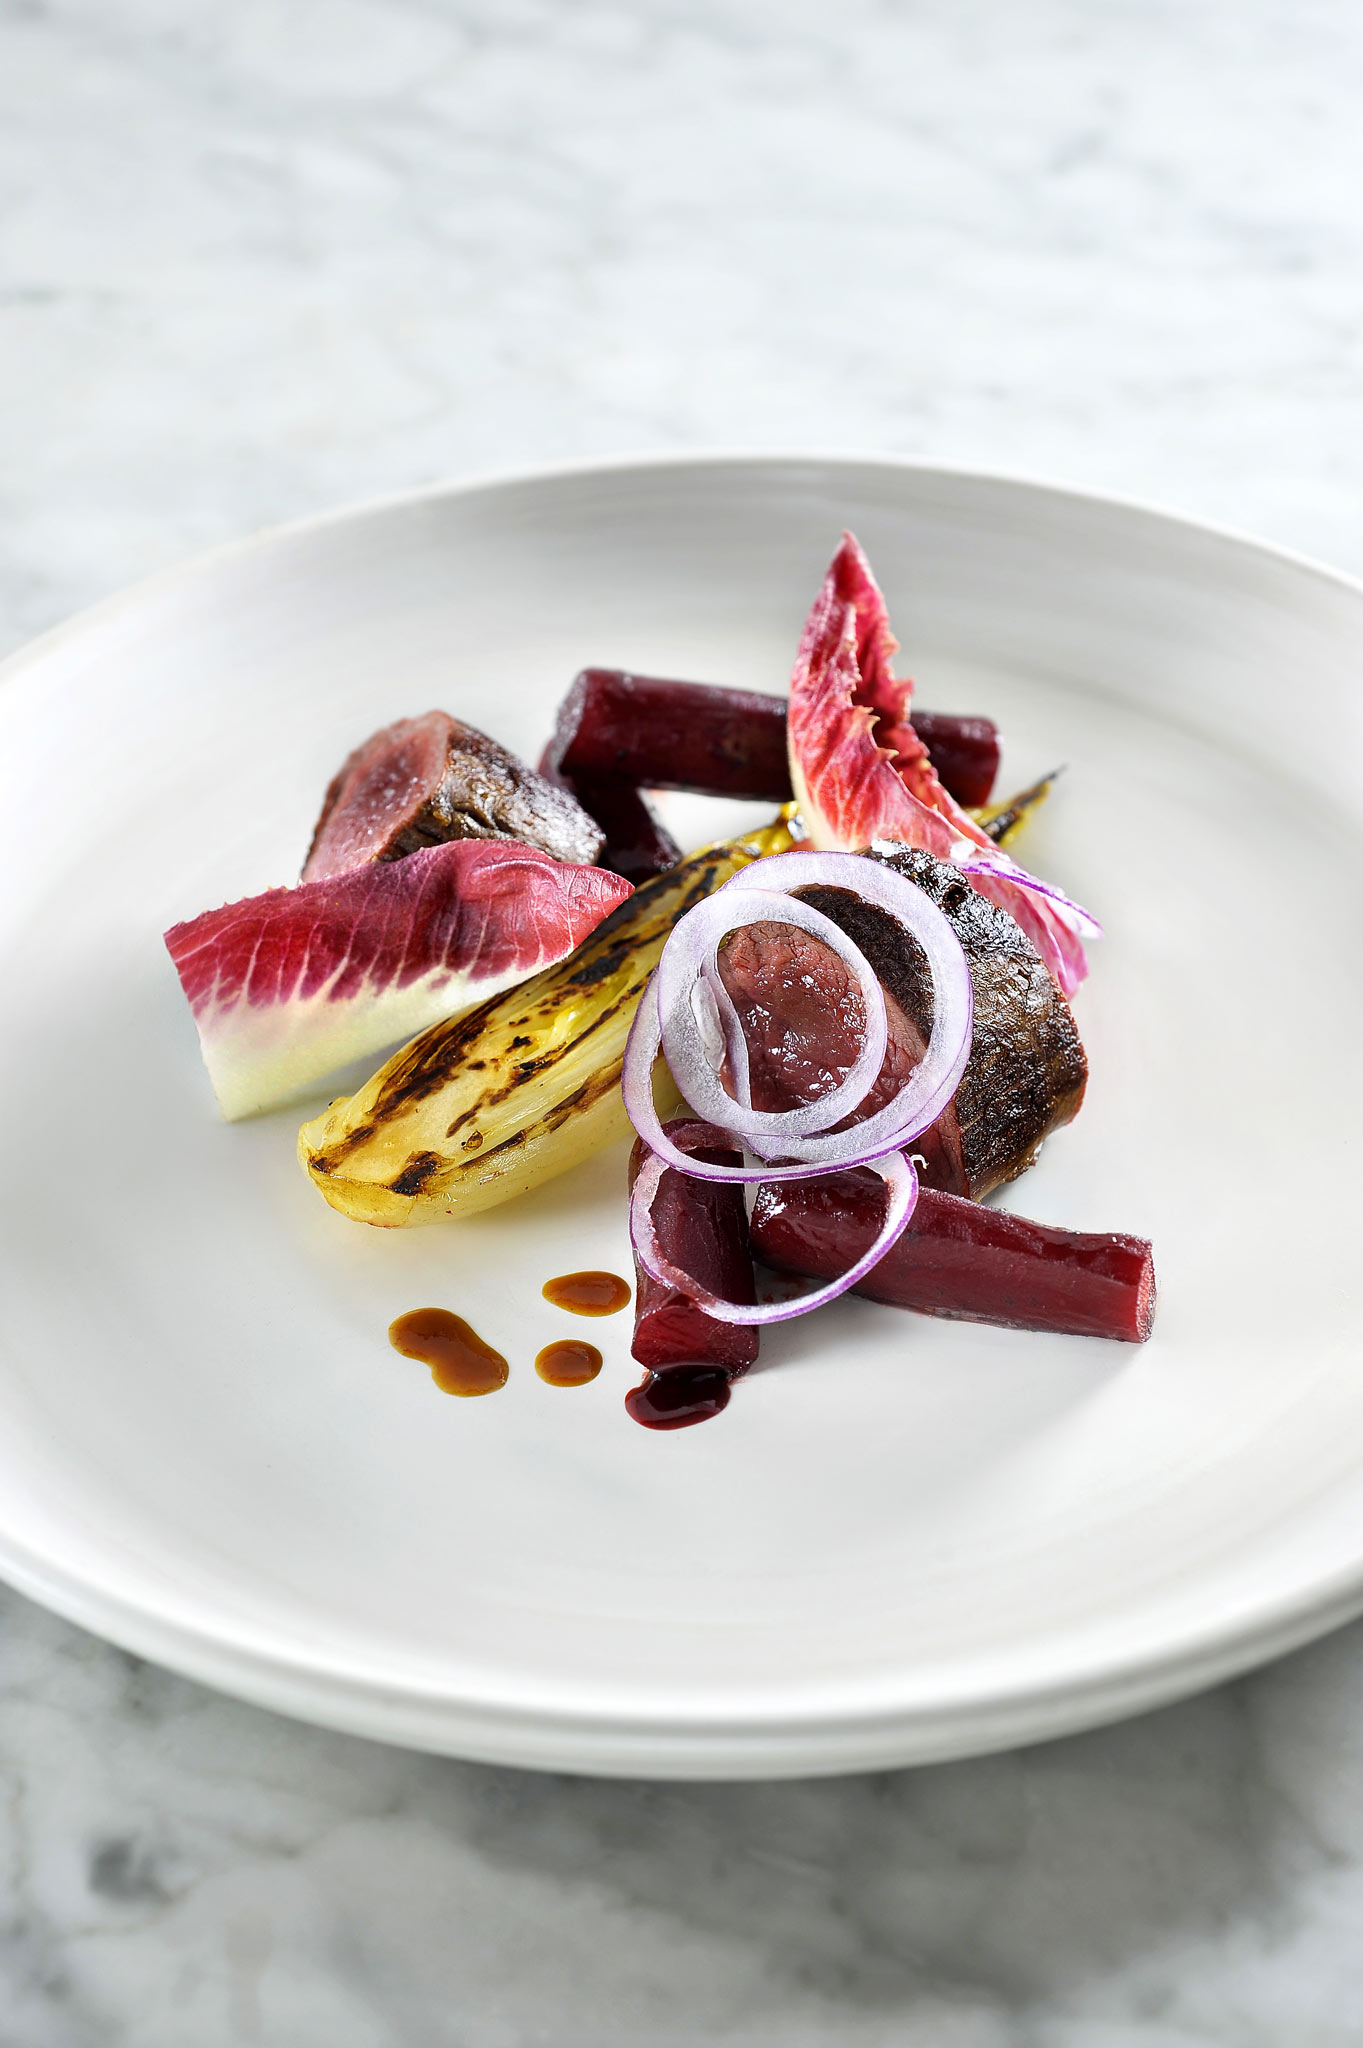 Scorzonera, Red Beetroot, Elixir d’Anvers, Chicory, Venison, Red Onion